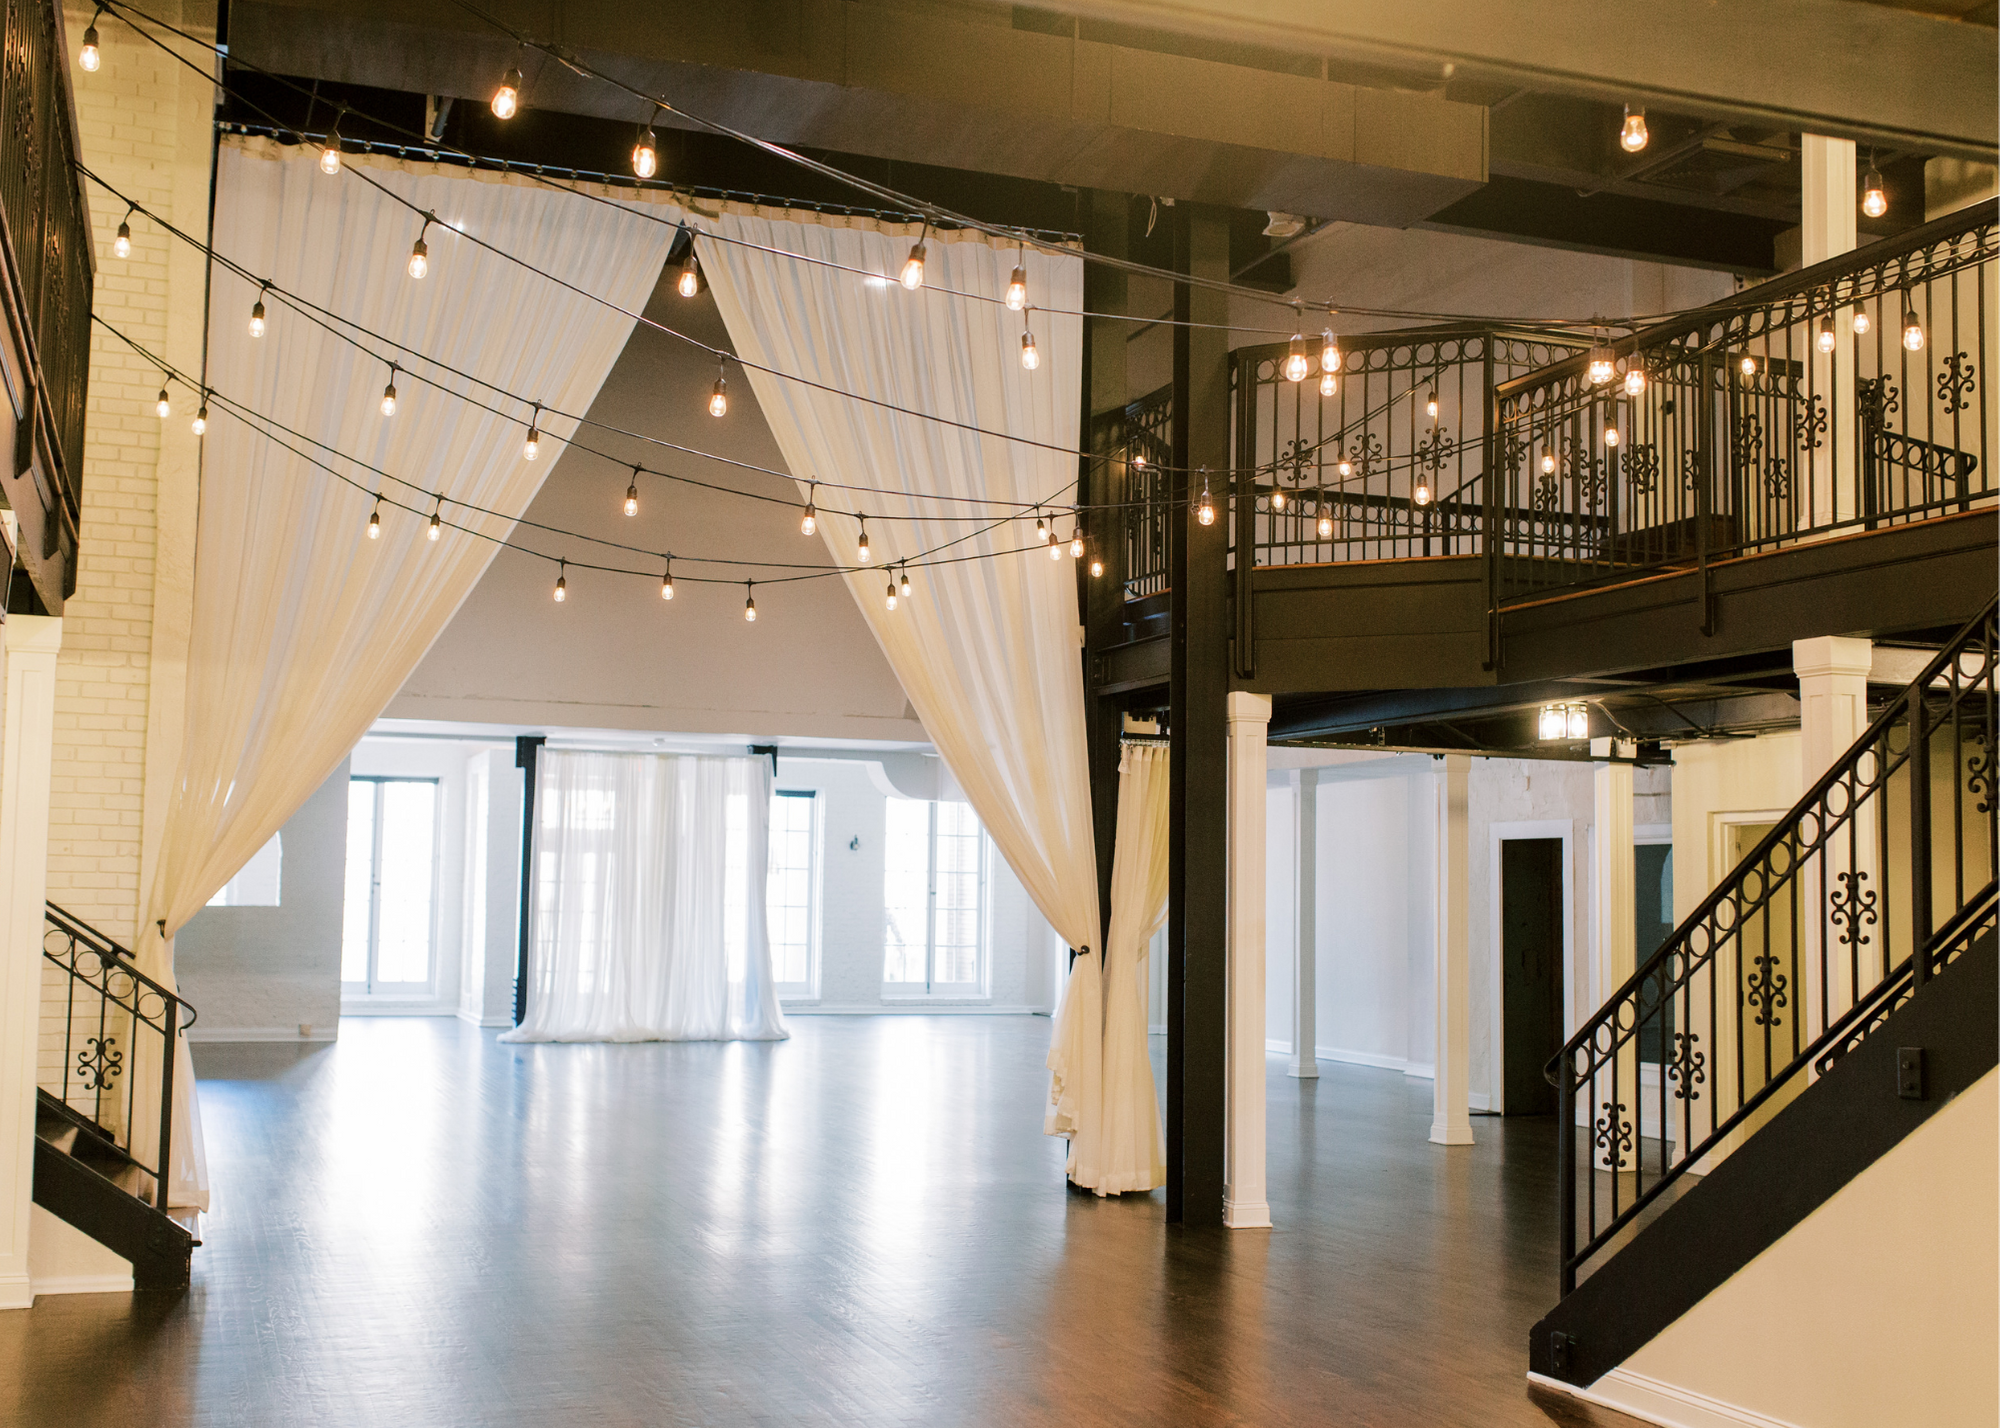 Dimmable bistro lights hang like stars our event spaces. Elegant drapery can is available for additional decor and to conceal reception tables and decor during a ceremony.